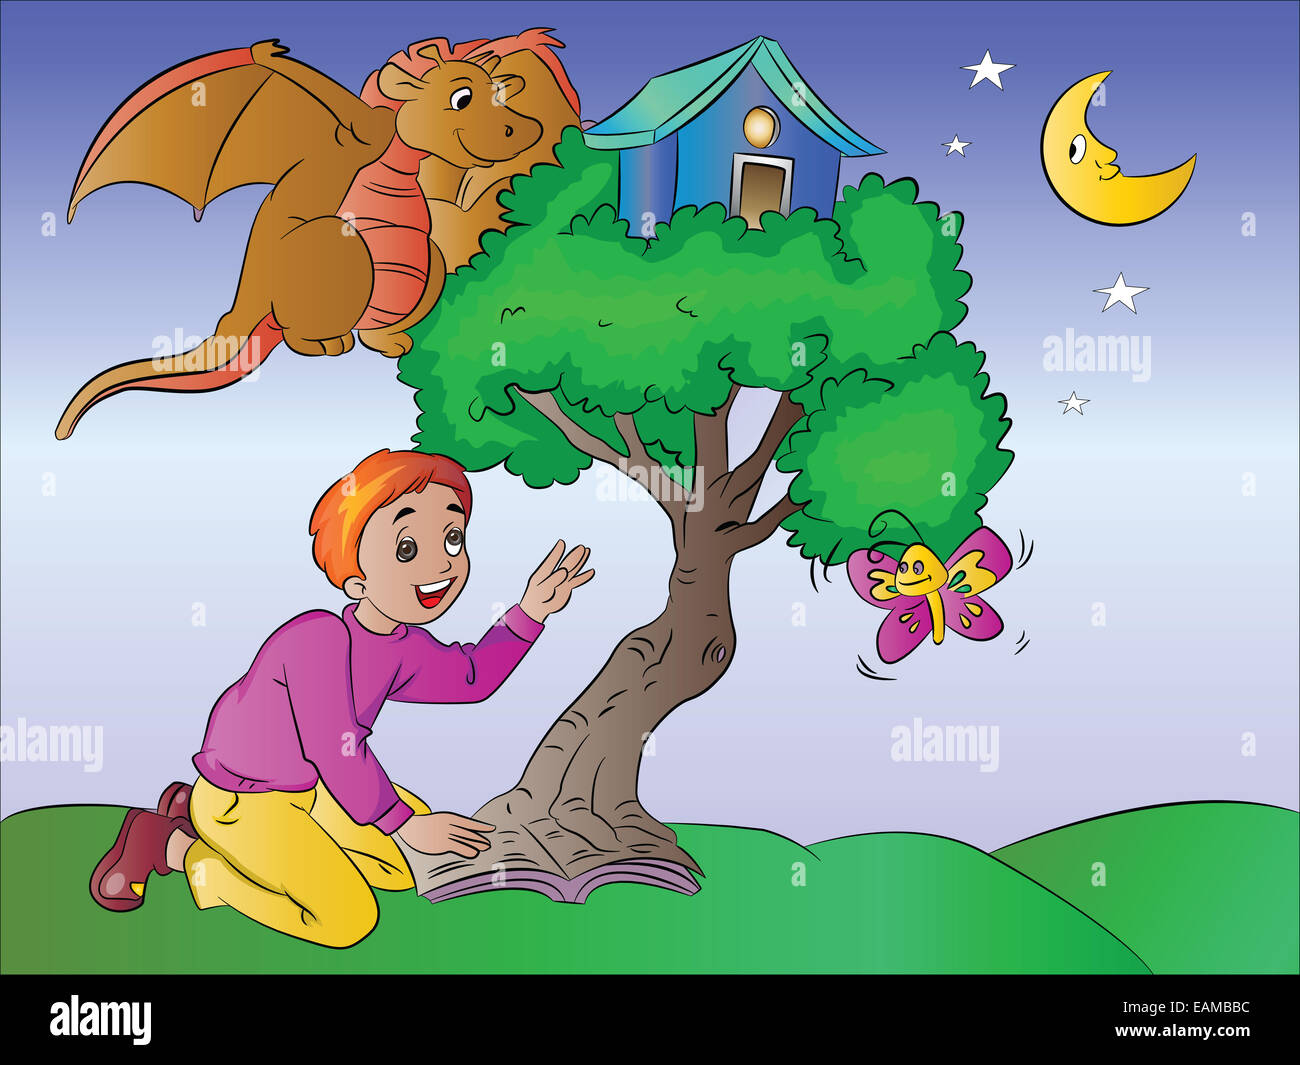 Boy Imagining a Treehouse with Butterfy and Dragon from a Book, vector illustration Stock Photo